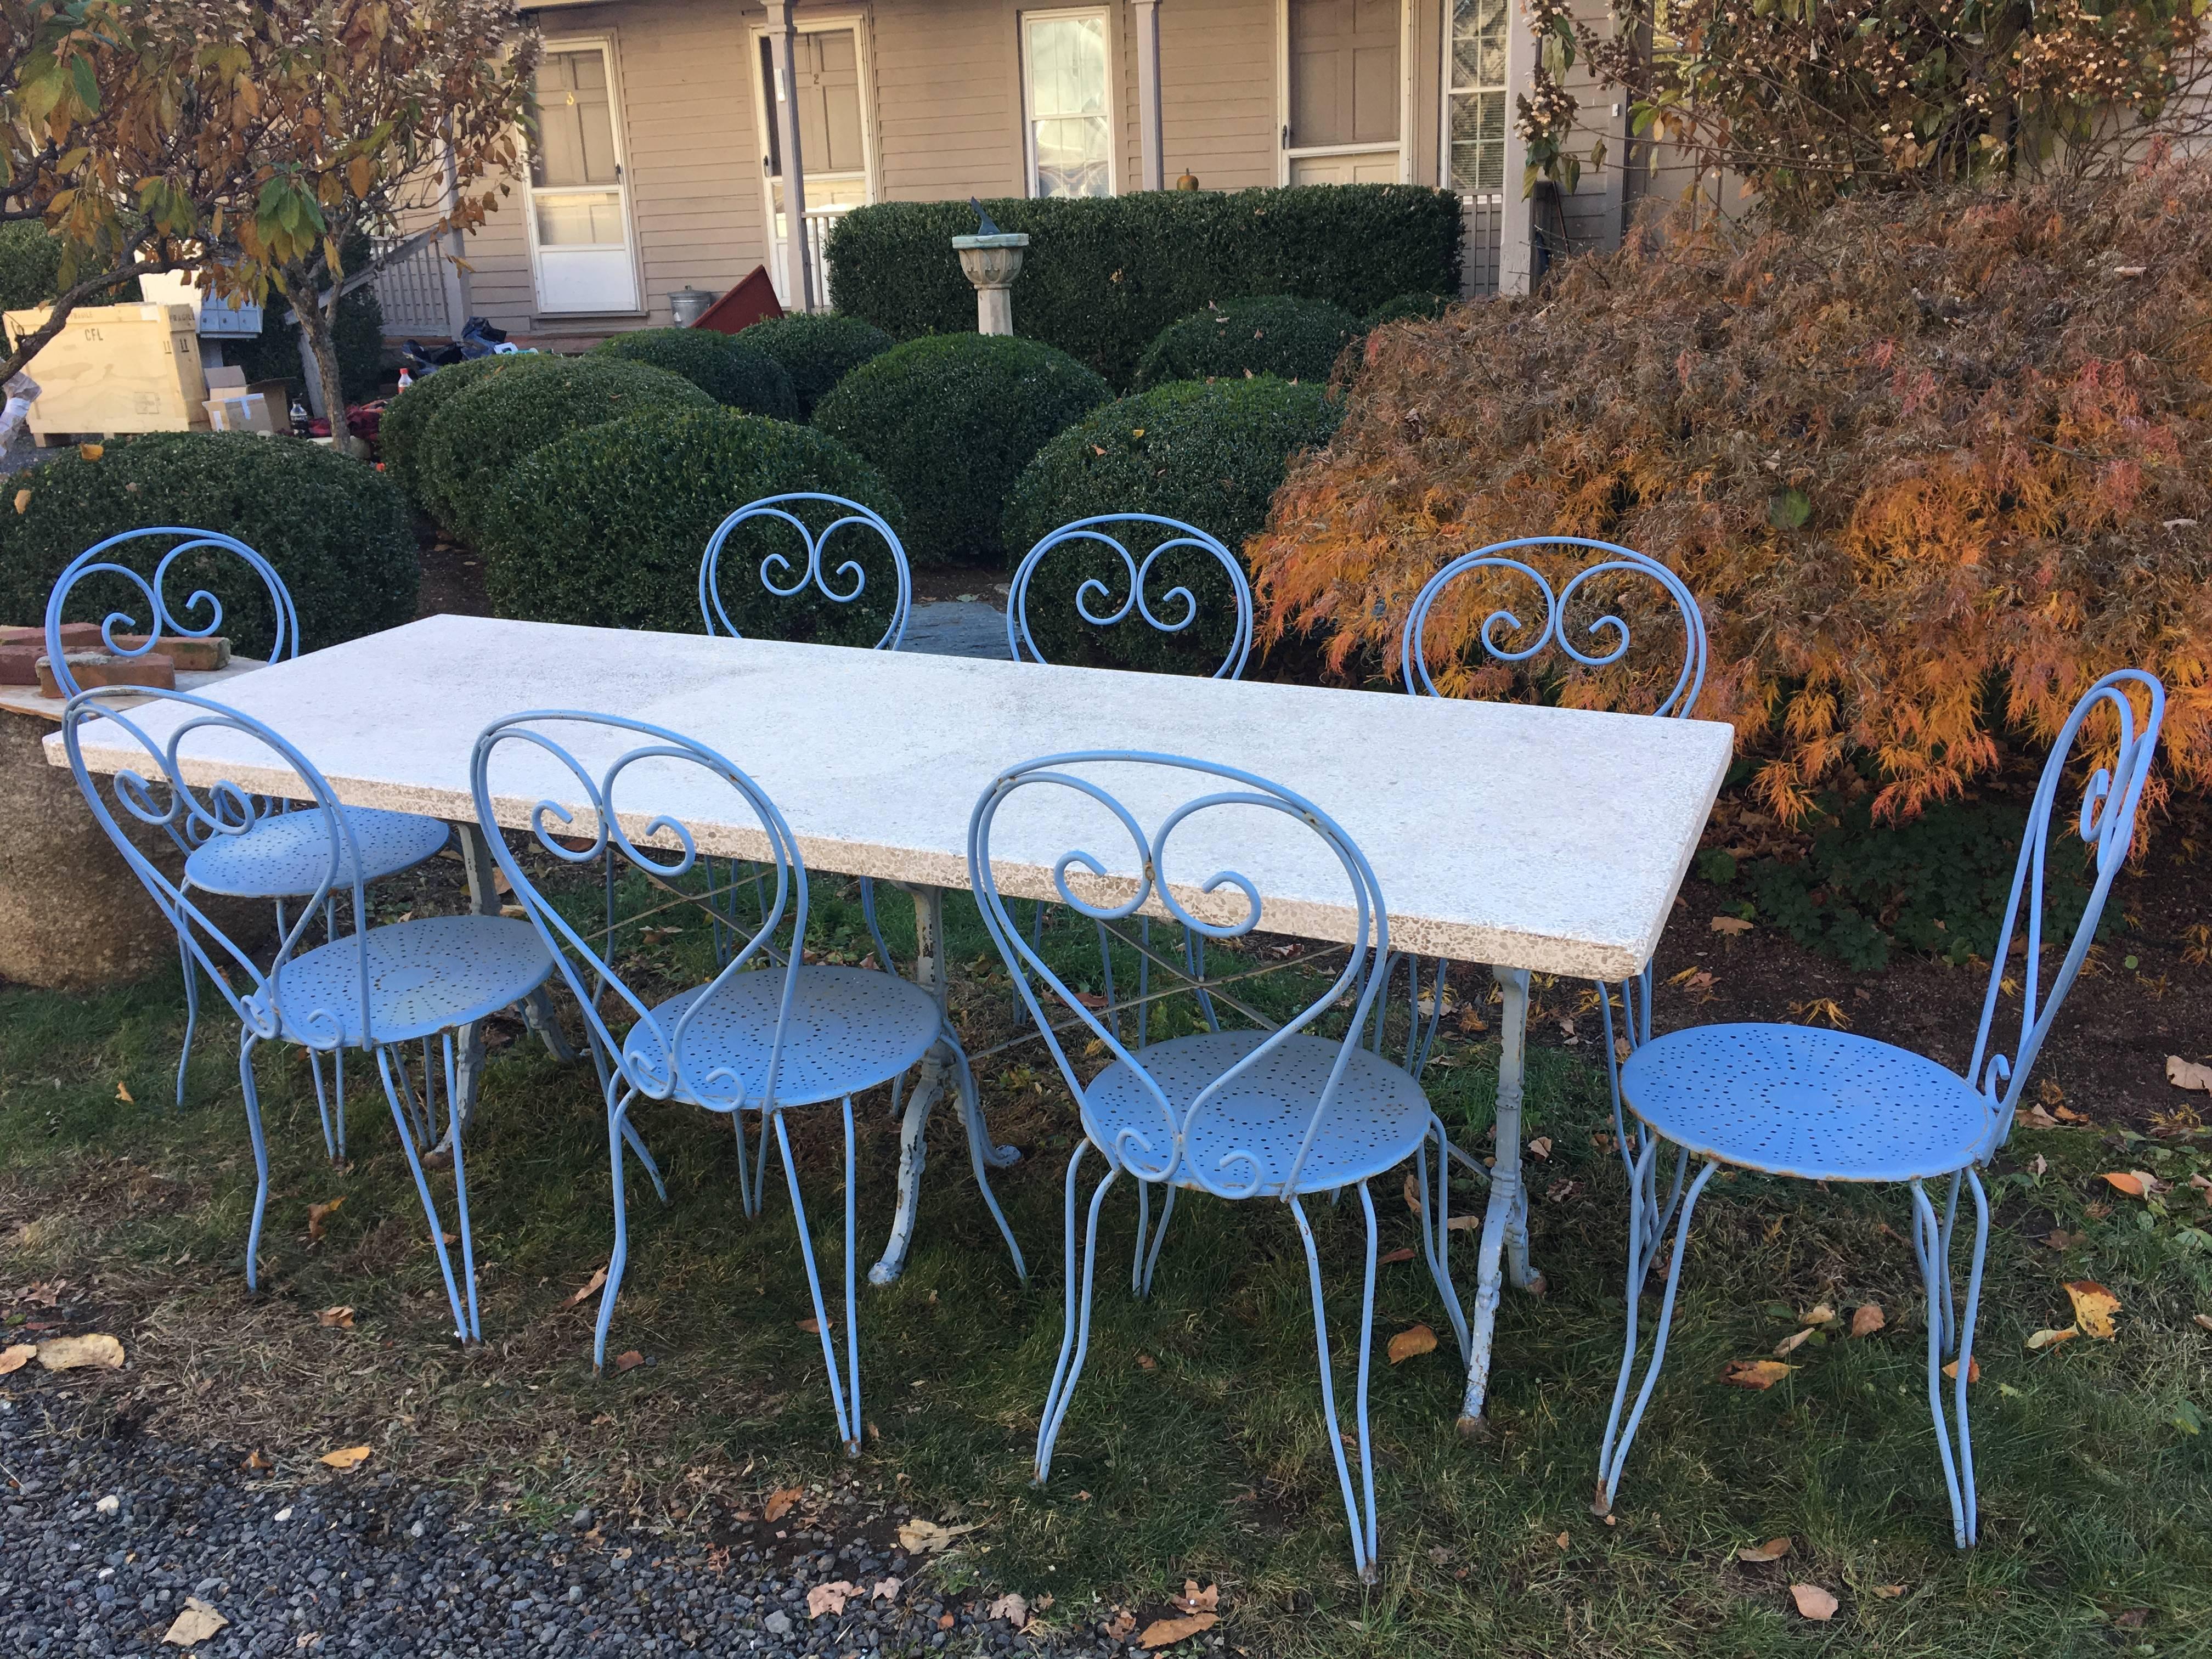 This lovely French dining set for eight comprises a triple cast iron base in old pale blue paint (signed Godin), a very heavy pale cream-colored terrazzo top, and eight classical French side chairs in faded medium blue paint. The table measures 86